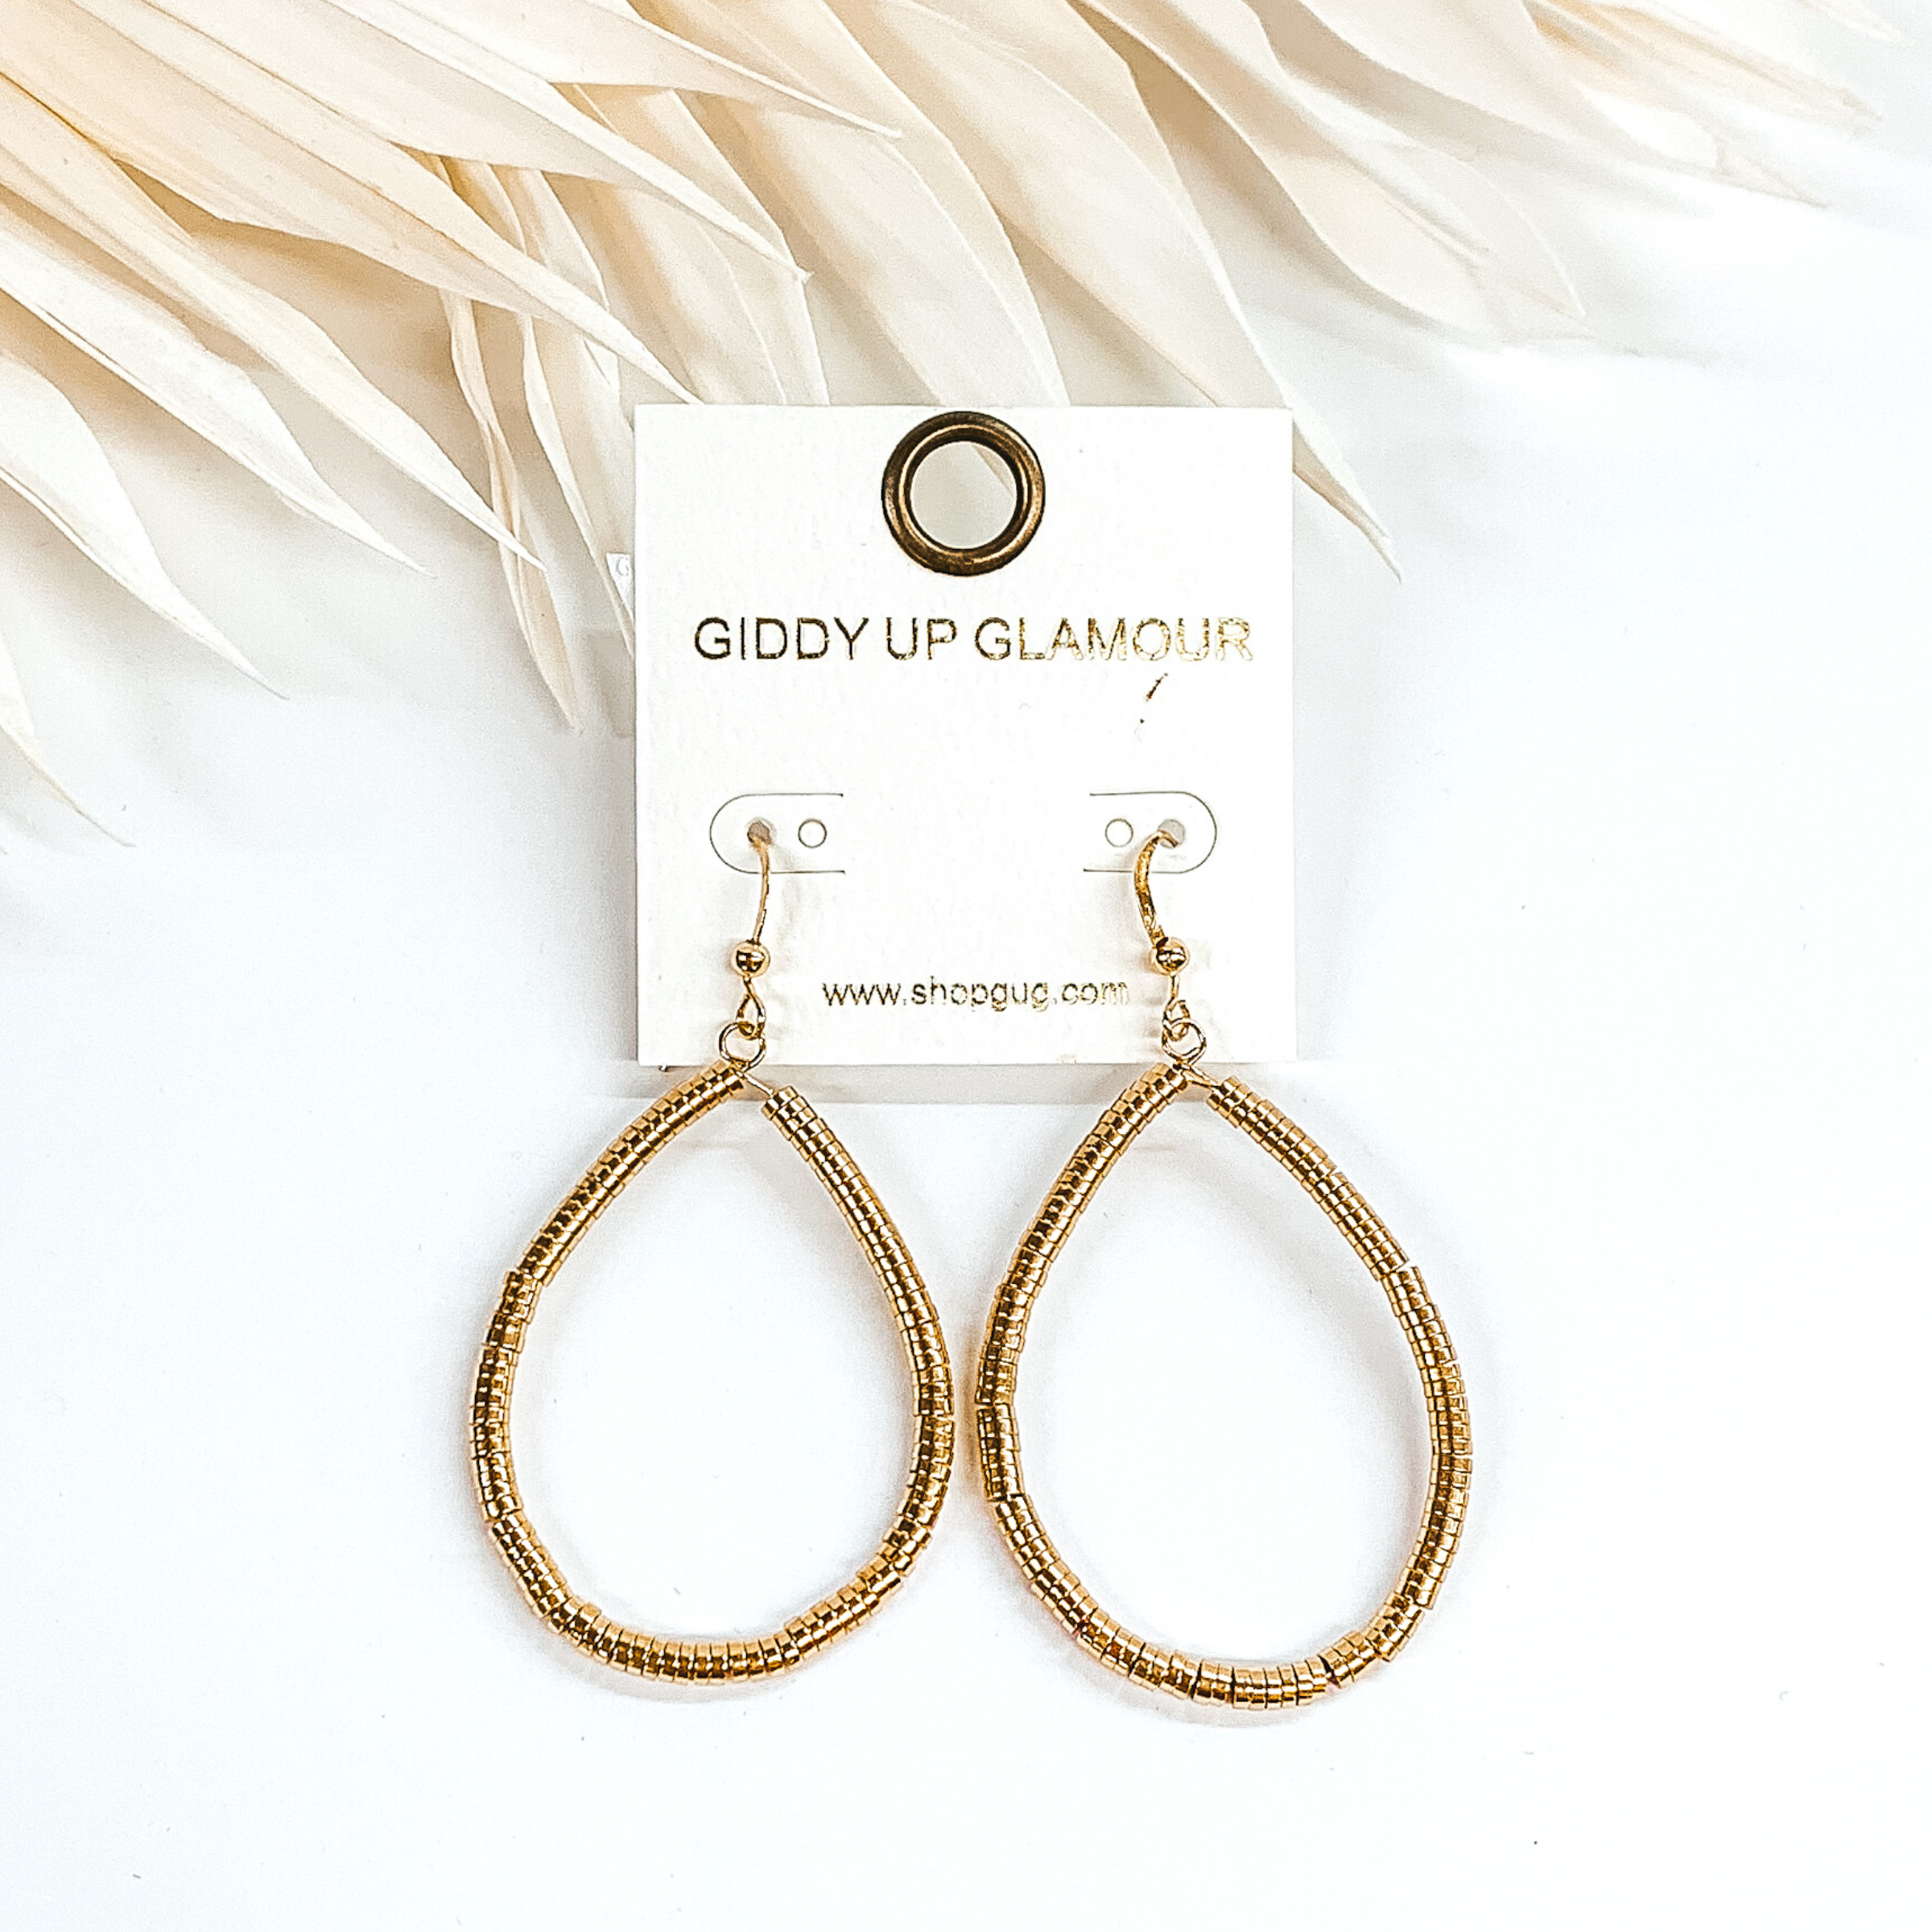 Teardrop disk beaded earrings in gold. These earrings are pictured on a white background with ivory leaves at the top of the picture.